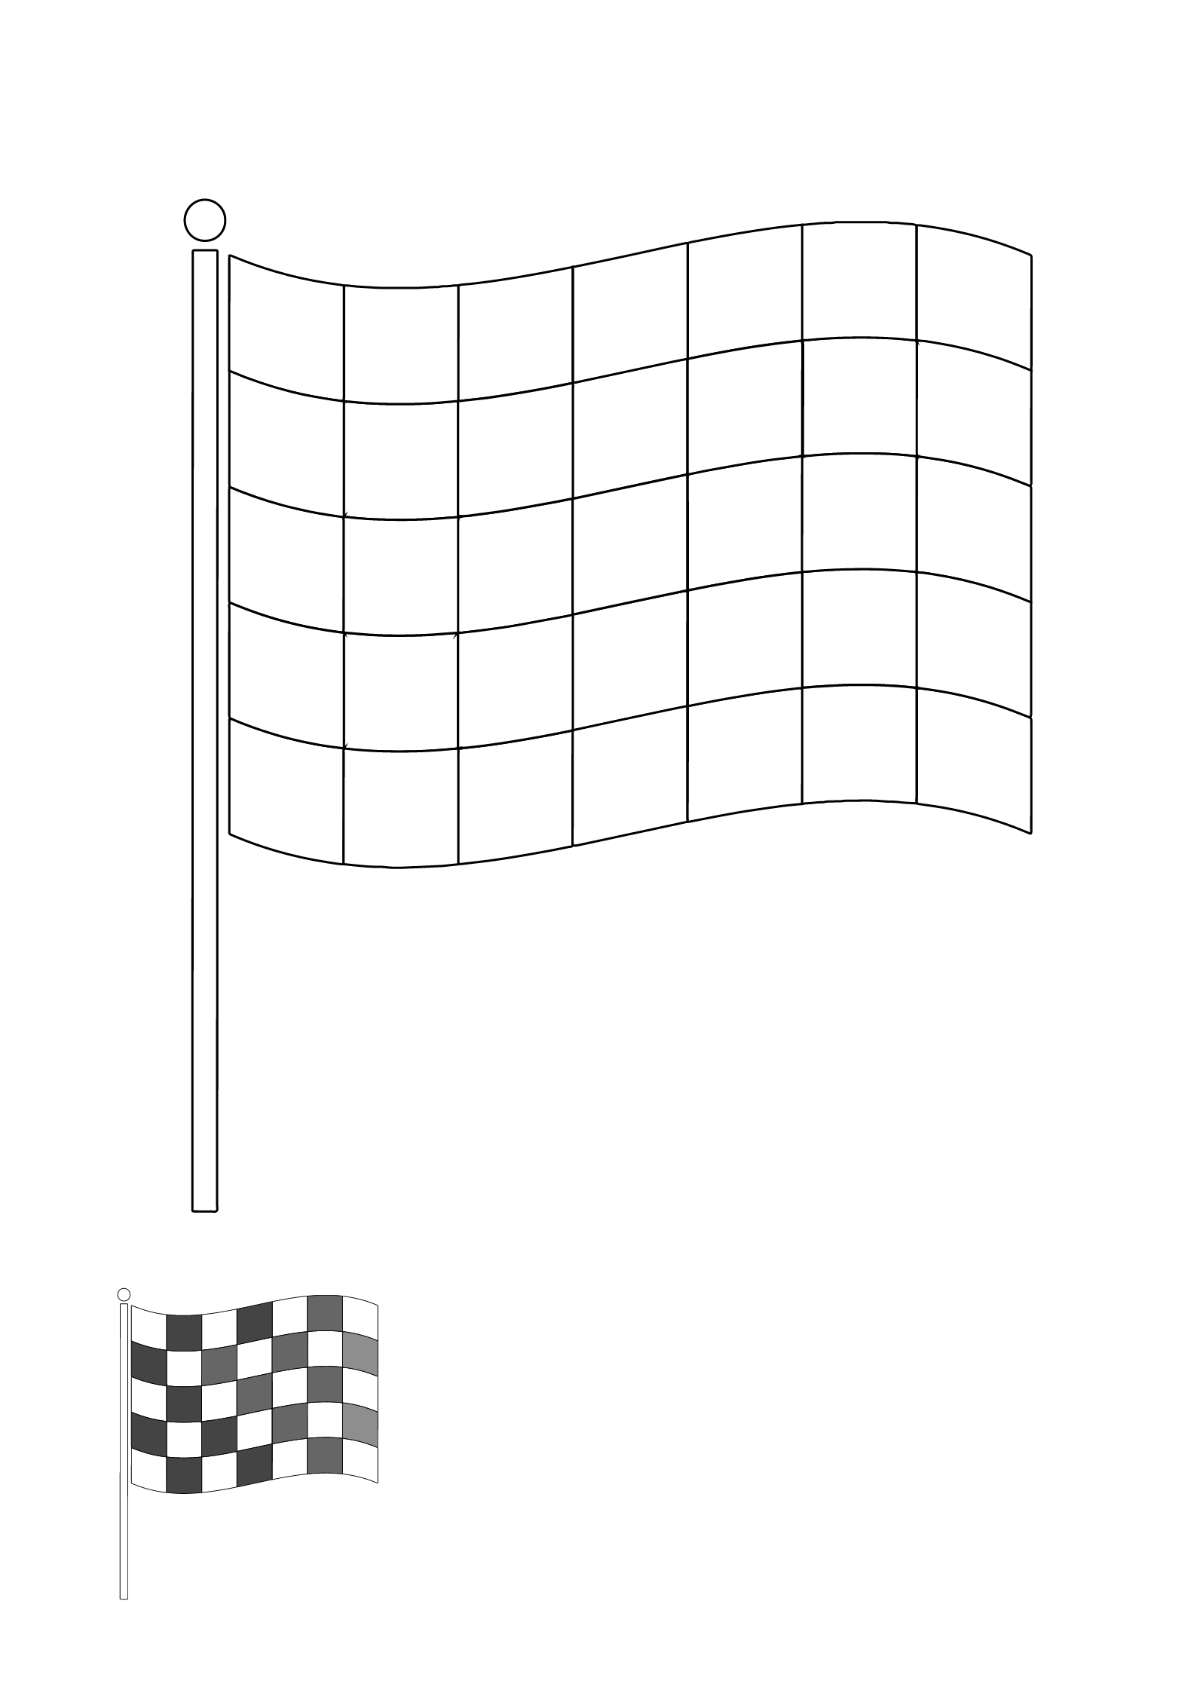 Faded Checkered Flag coloring page Template